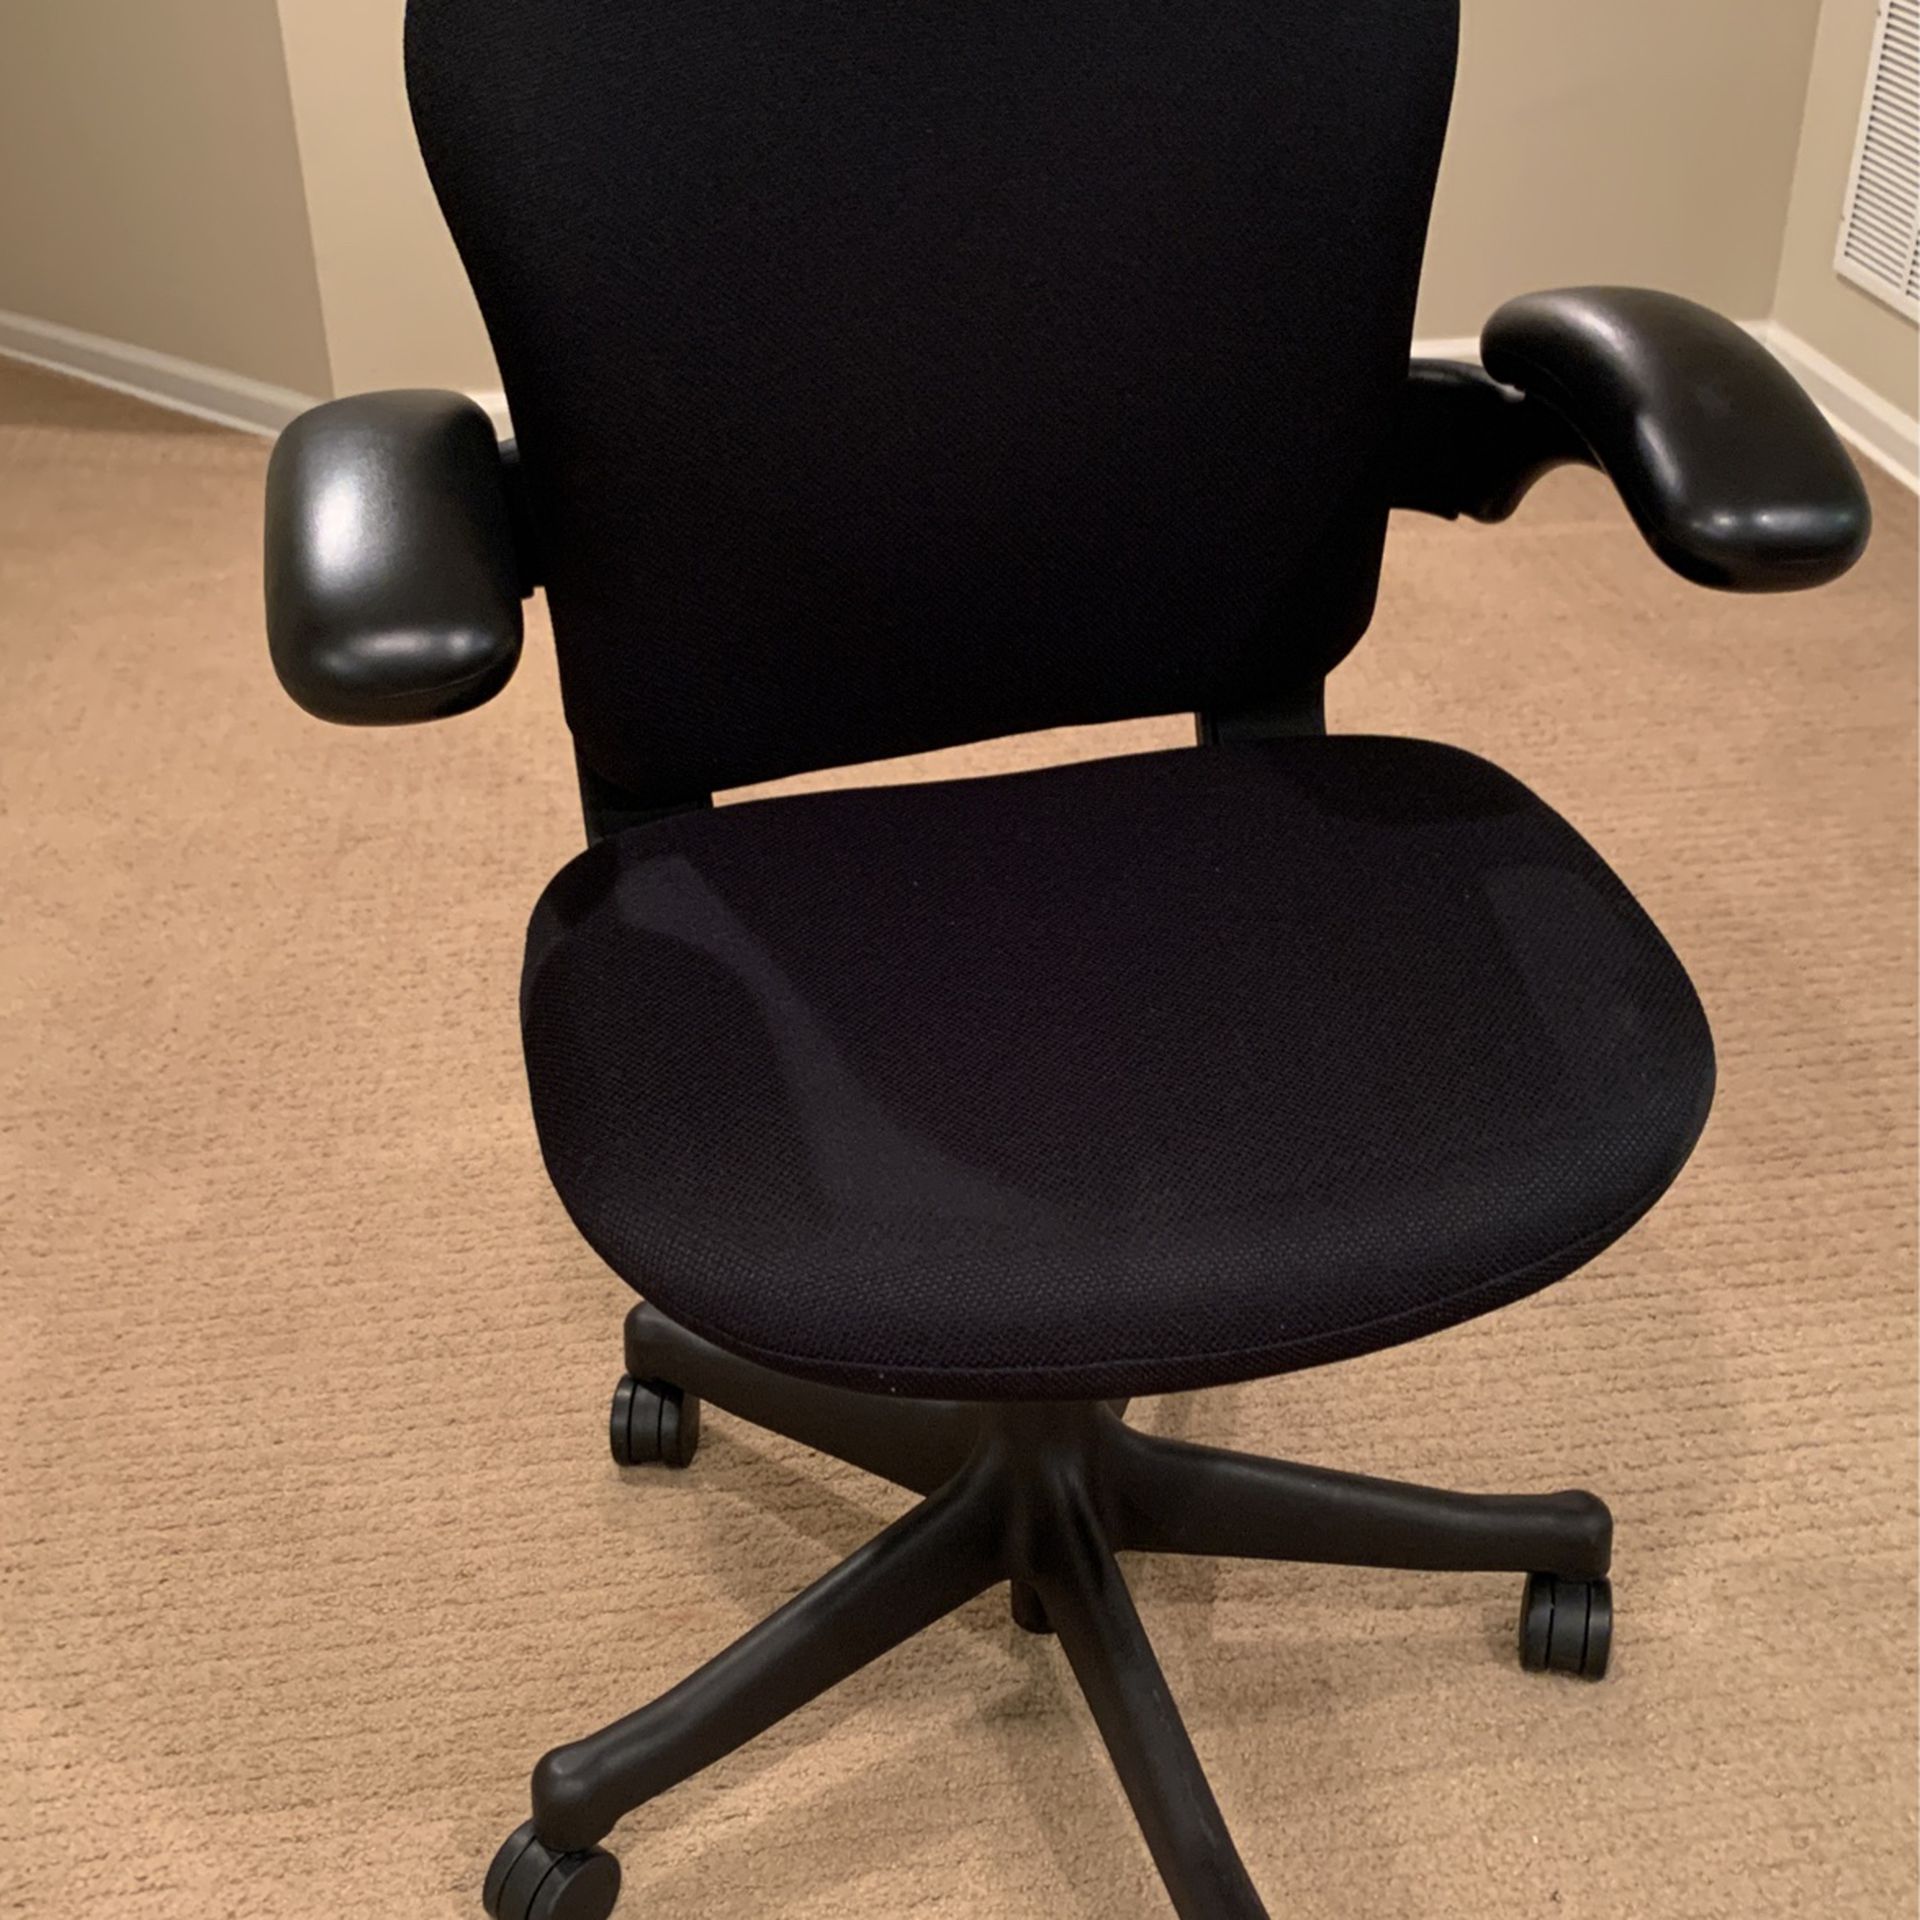 Black Cushioned And Adjustable Desk Chair With Leather Arms And Adjustable Levers